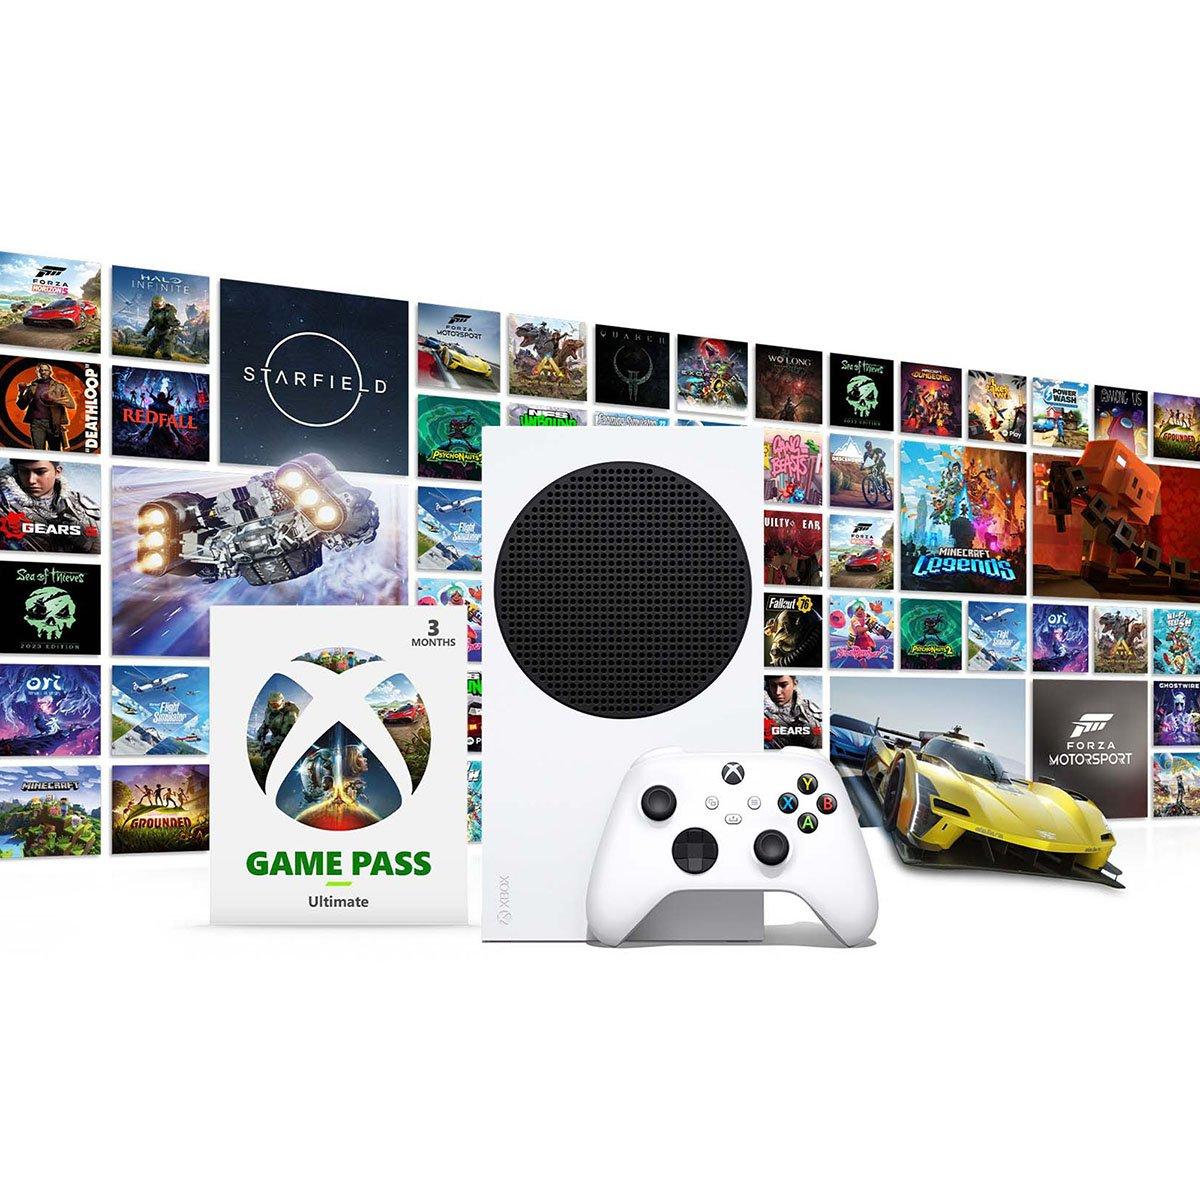 Discounted Xbox Series S Bundle Comes With Extra Controller